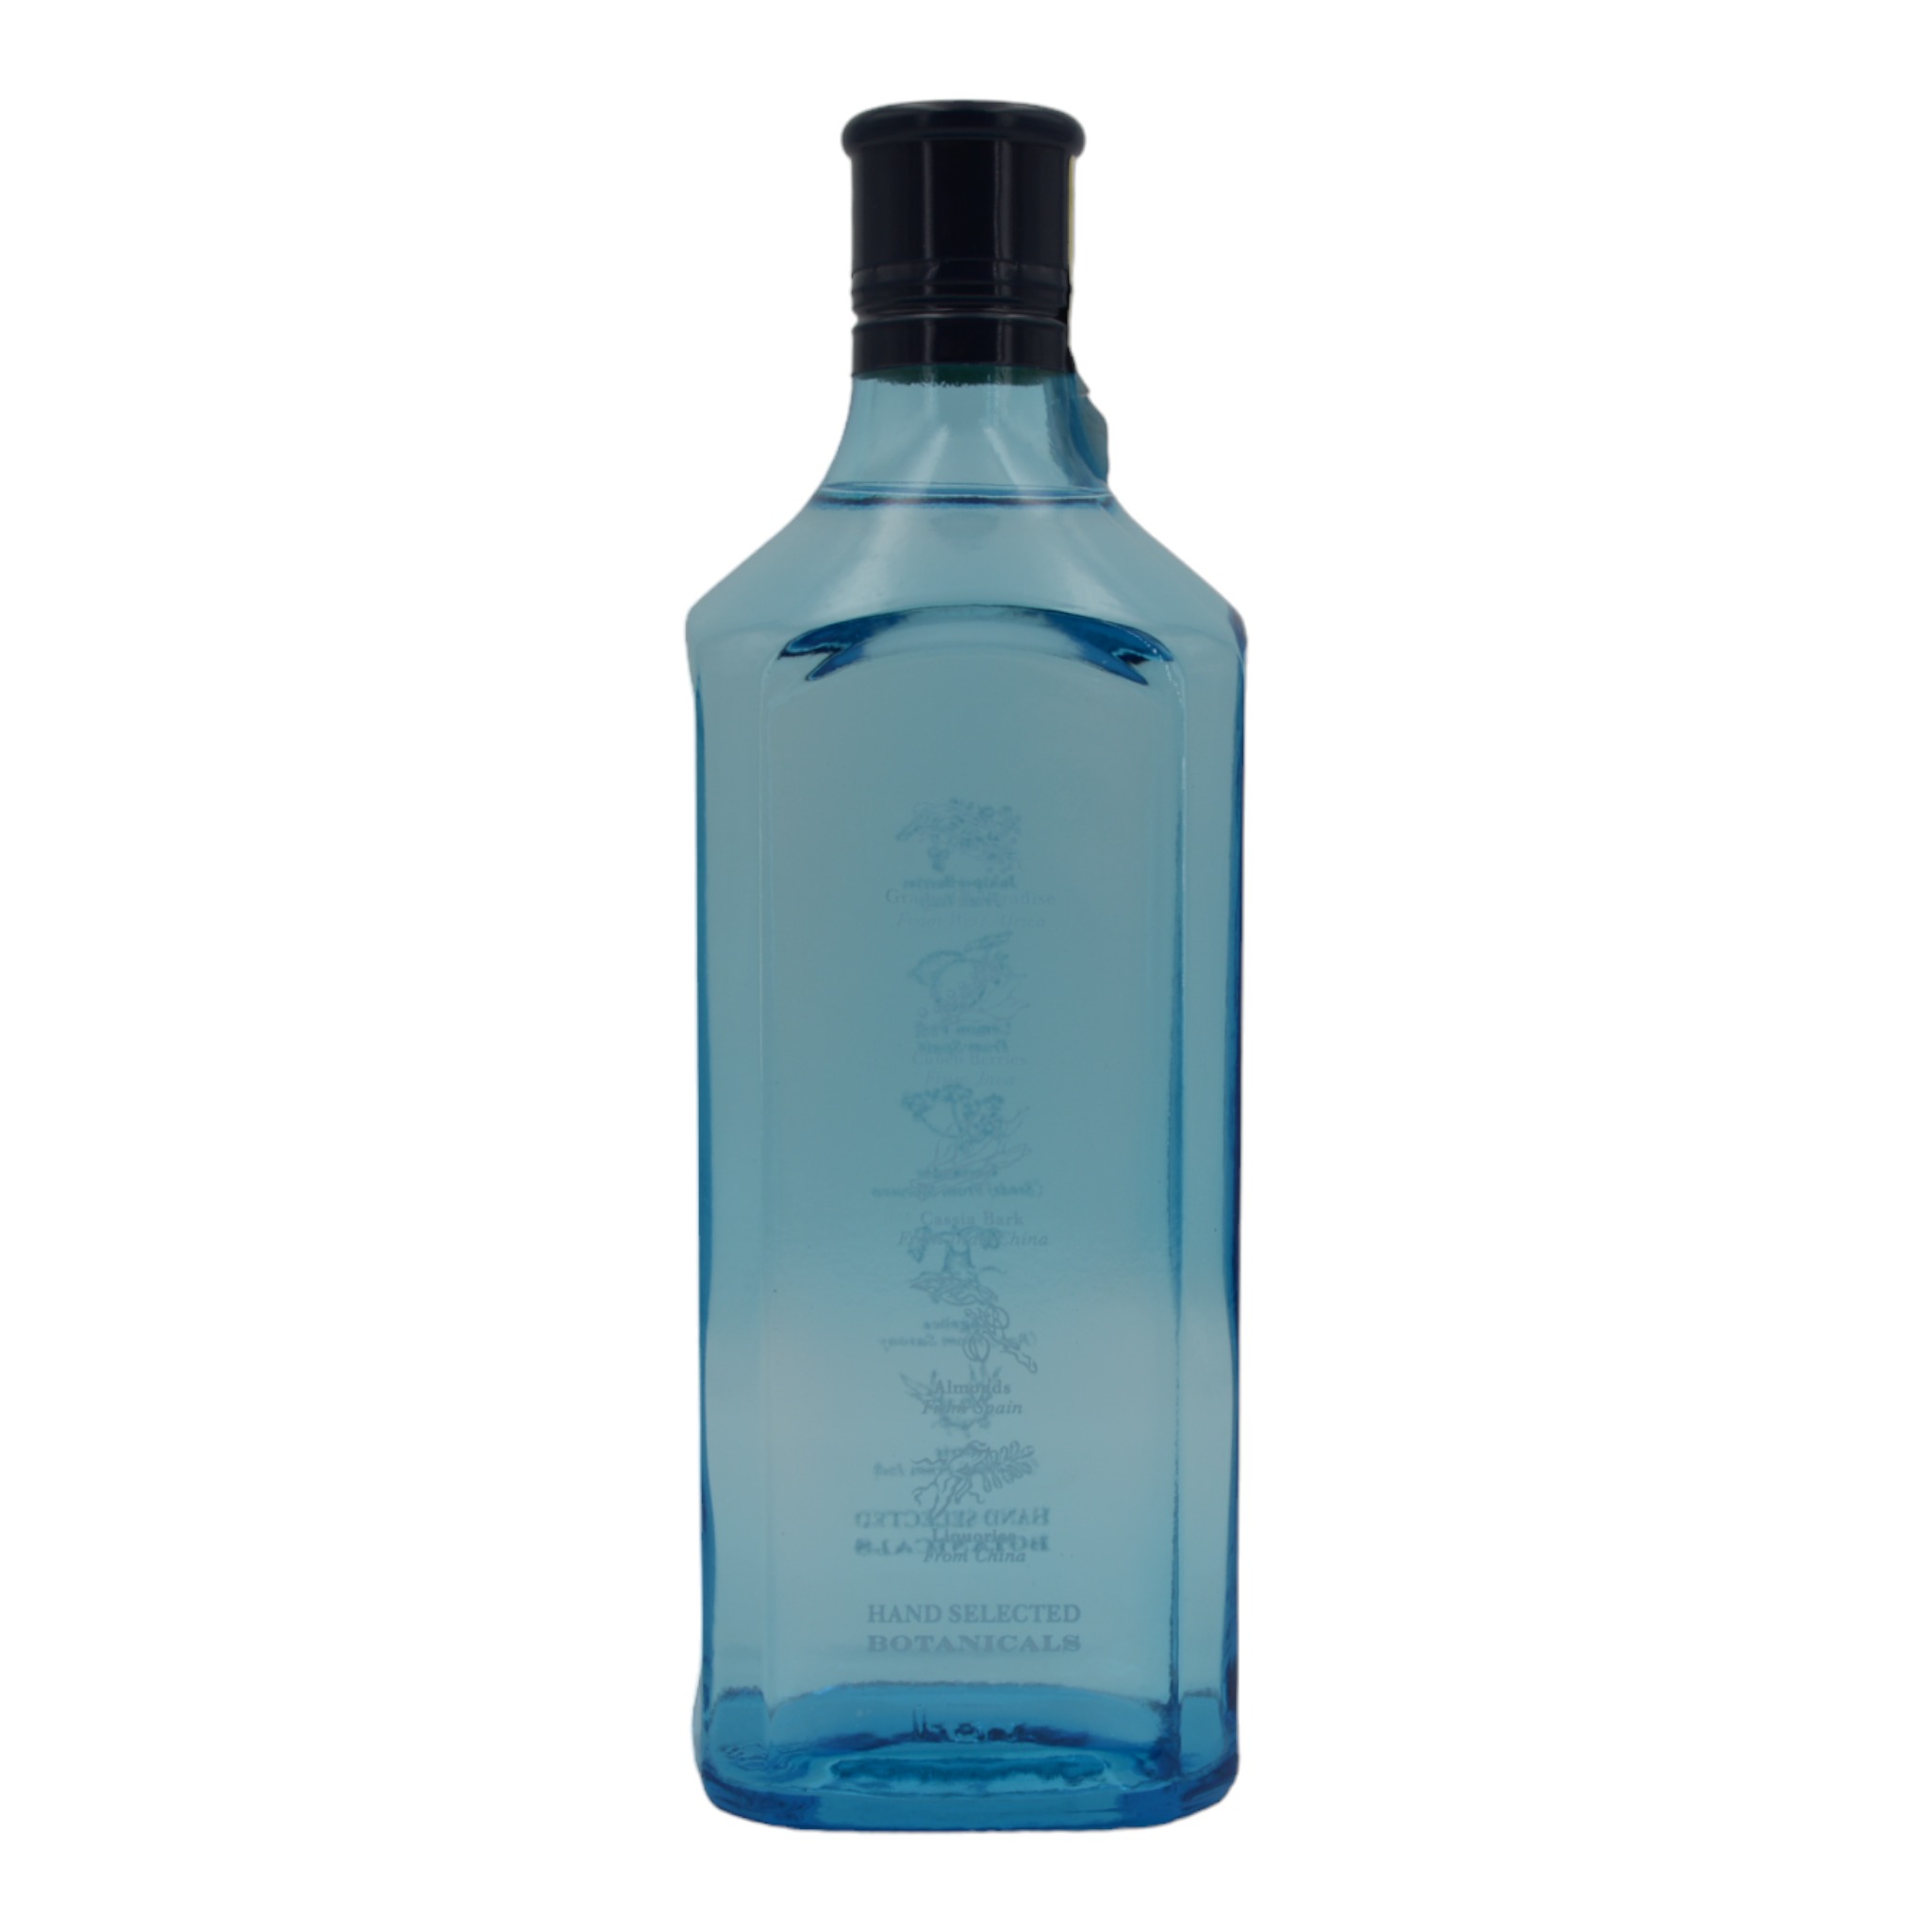 5010677714006Bombay Sapphire London Dry Gin Vapour infused s2 - Weinhaus-Buecker